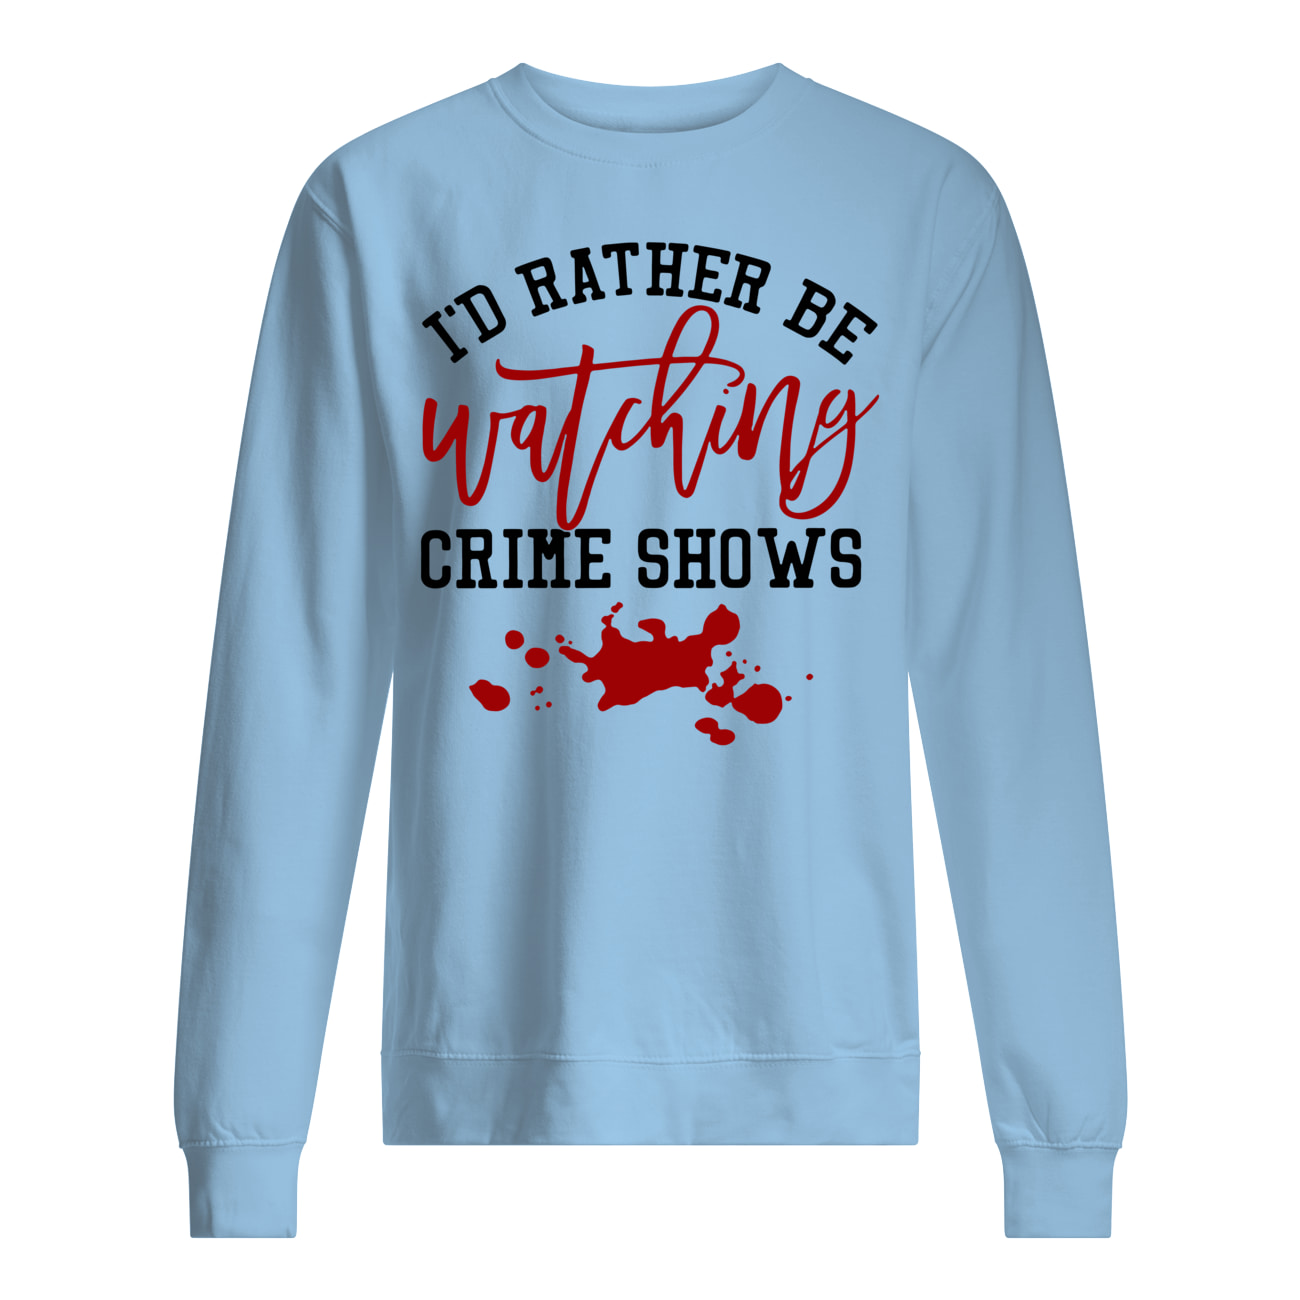 I'd rather be watching crime shows sweatshirt